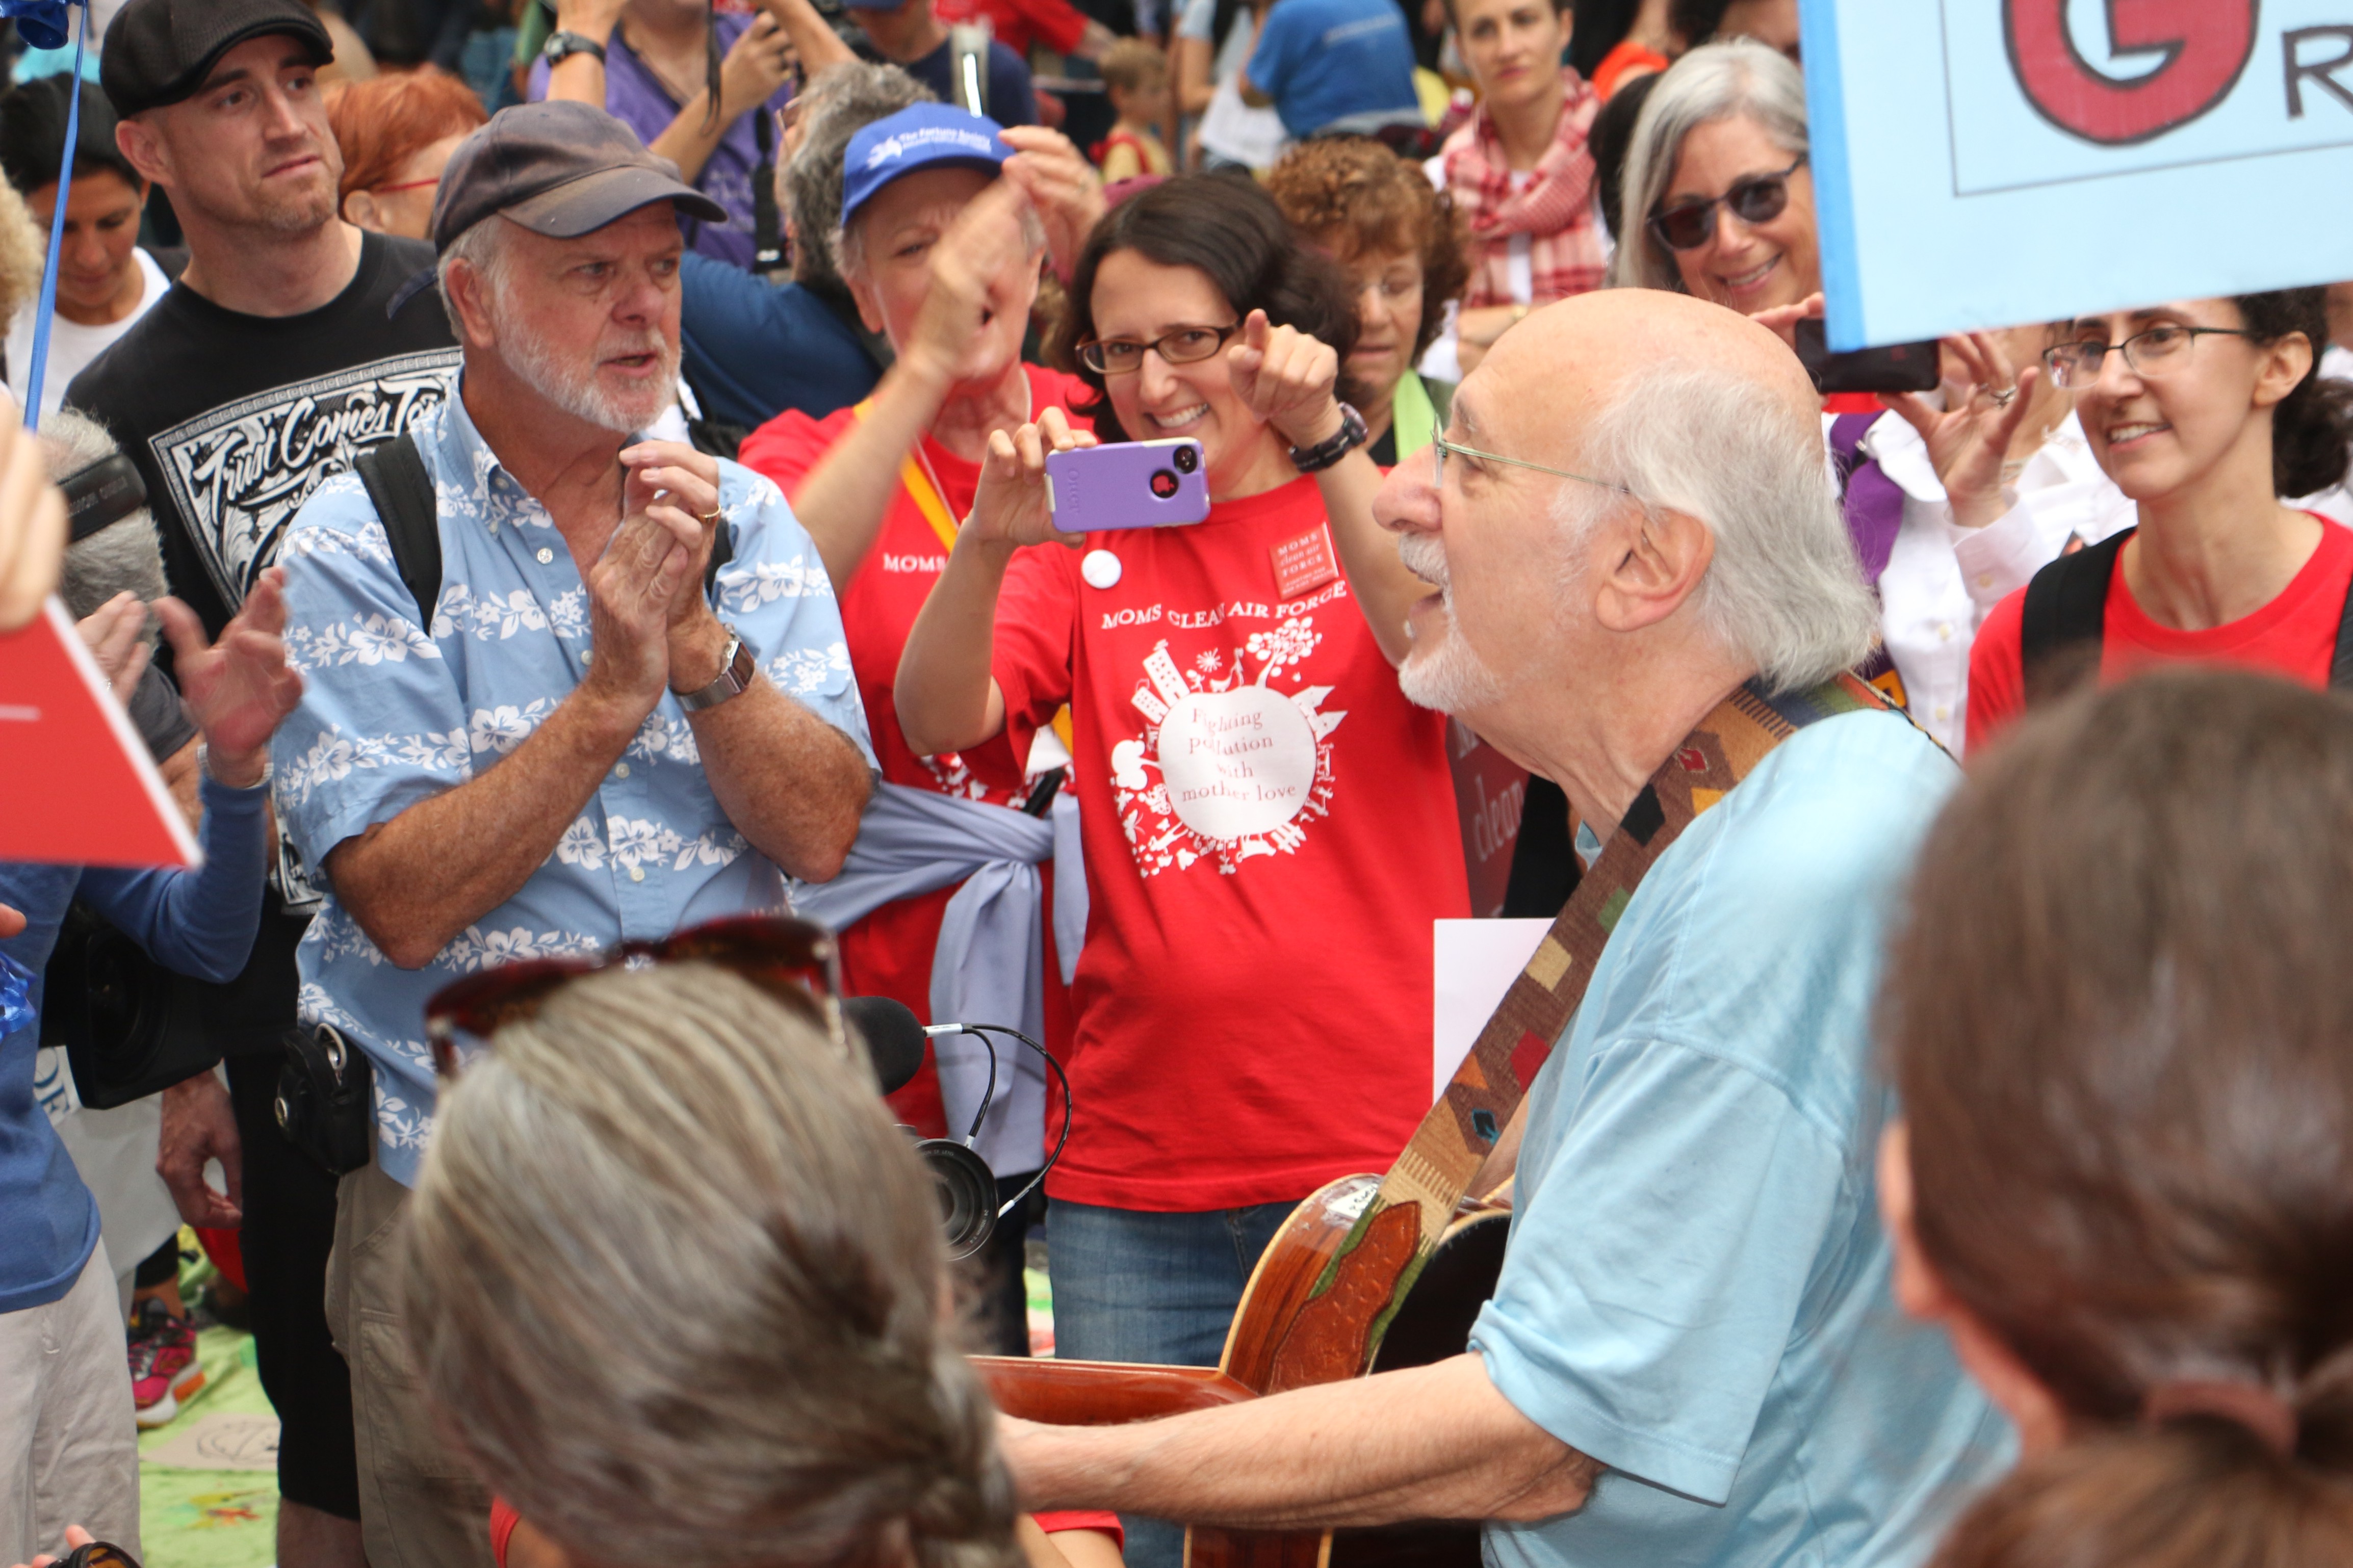 Peter Yarrow at the People's Climate March